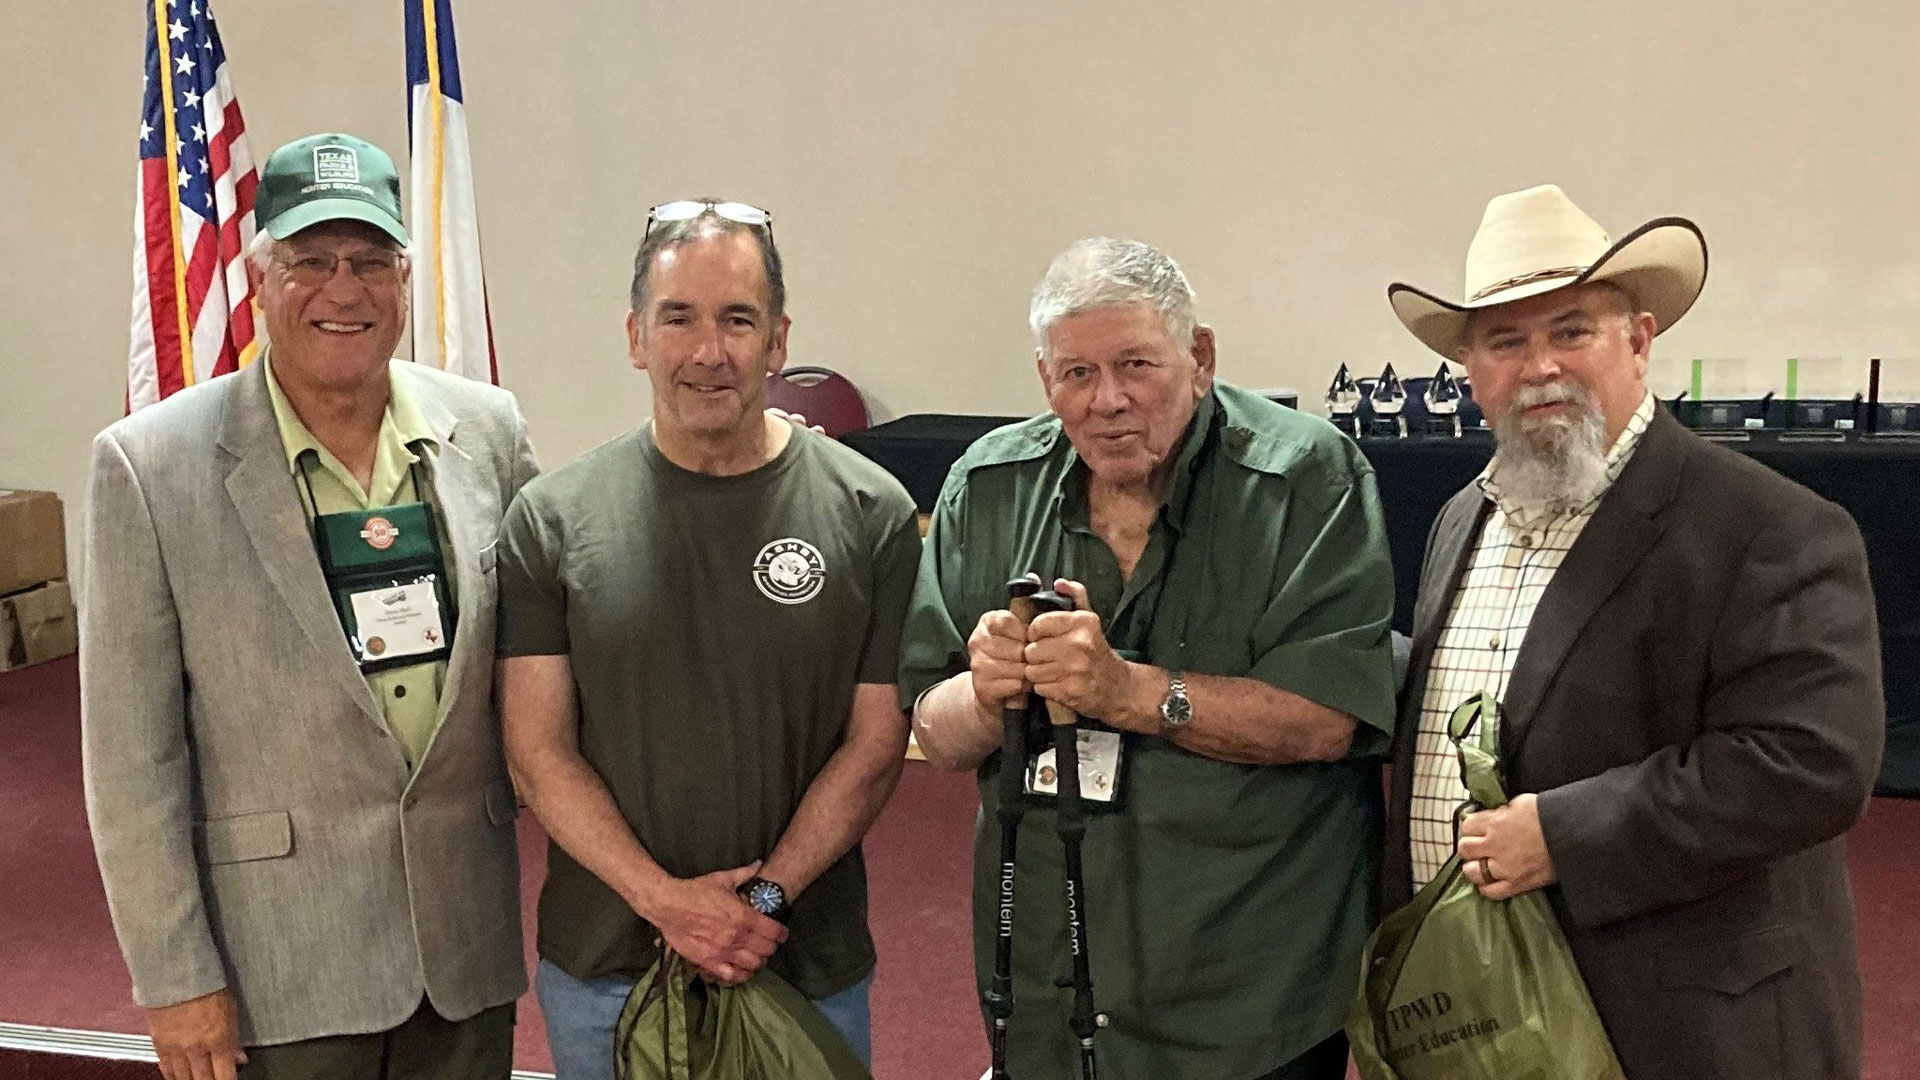 Steve Hall, left, Texas Parks and Wildlife (TPW) hunter education coordinator, joined ABF co-founders Rob Neilson and Dr. Ed Ashby, and Randy Spradlin, TPW hunter education specialist for West Texas, for the TPW event that drew hunter education instructors from across the state.